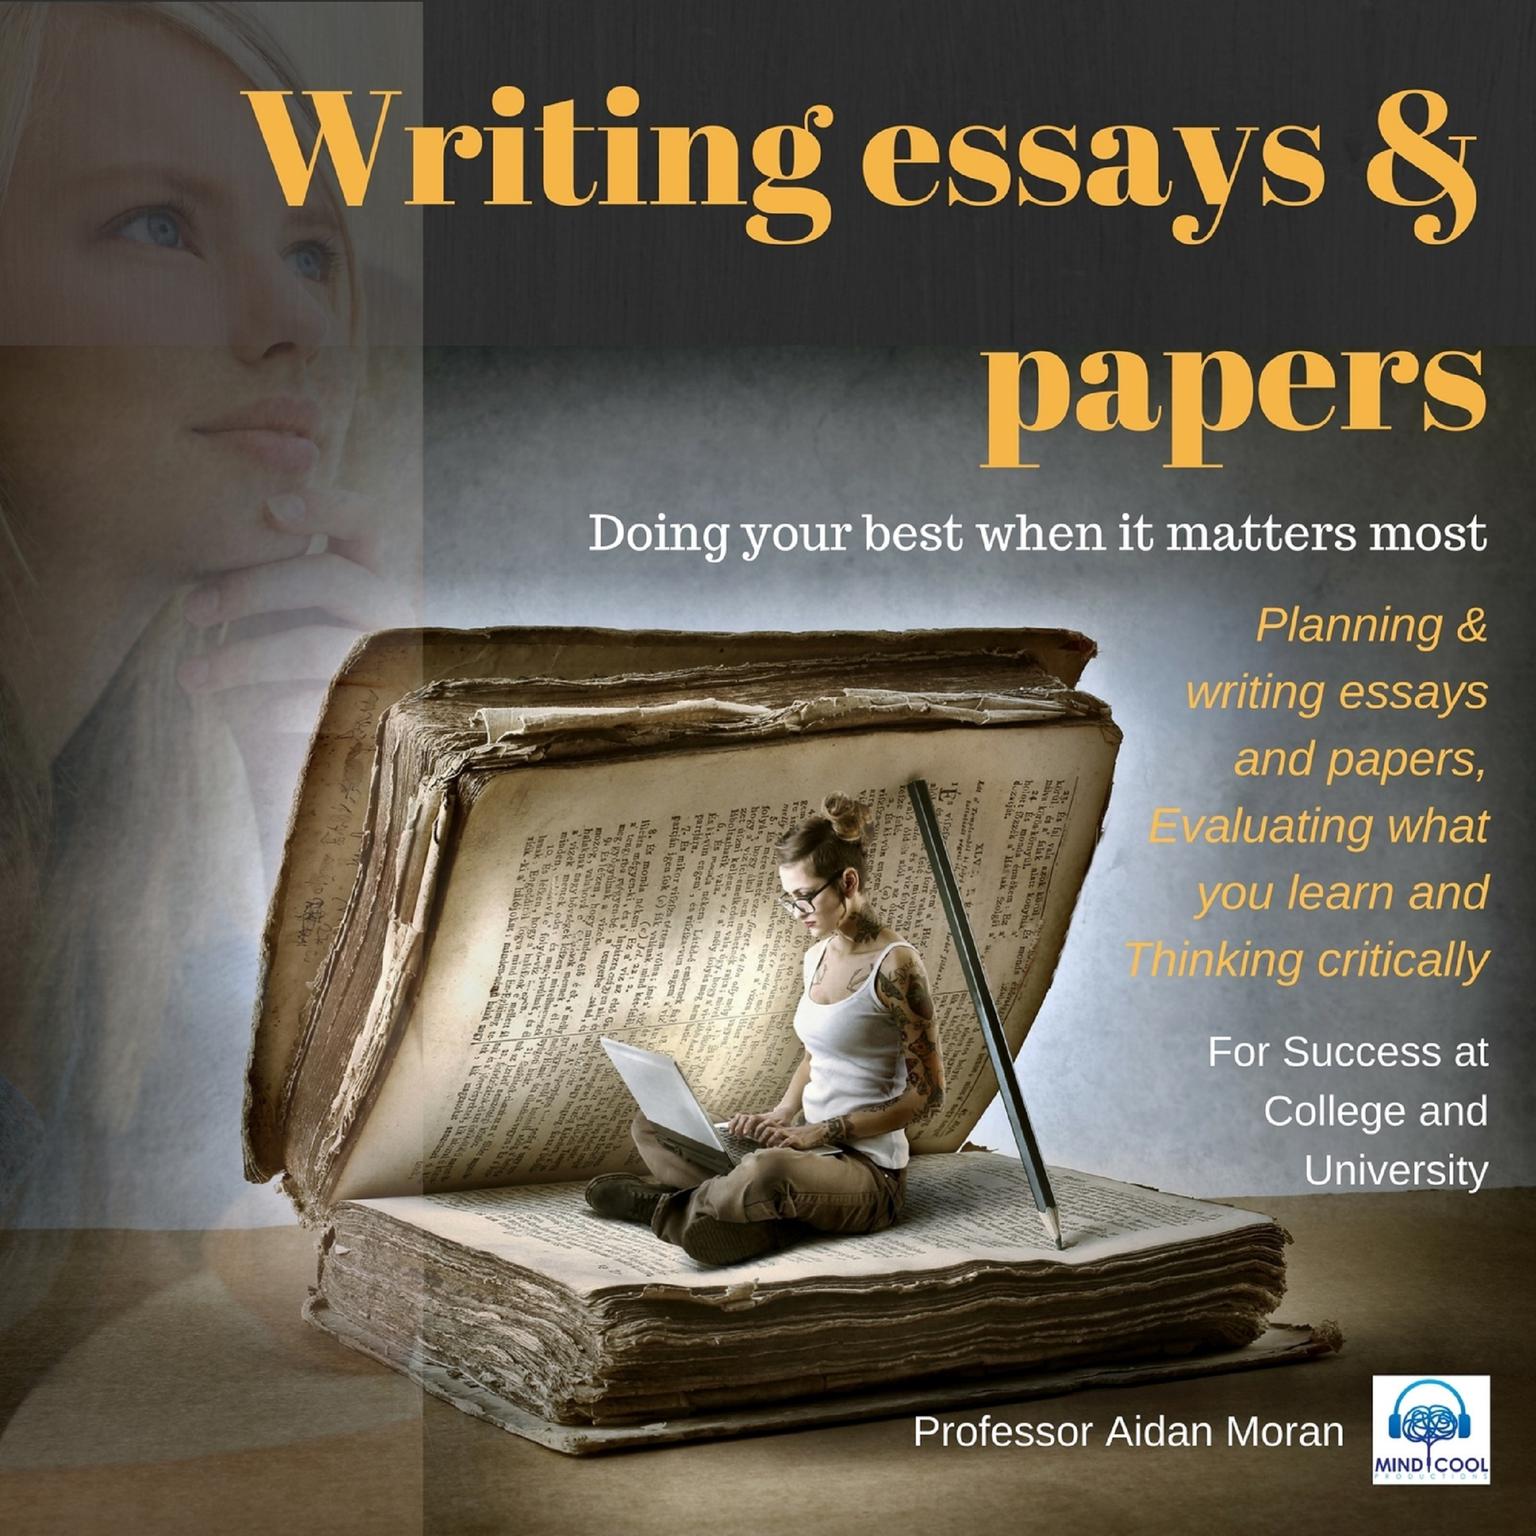 Writing essays & papers: For Success at College and University: For Success at College and University Audiobook, by Professor Aidan Moran